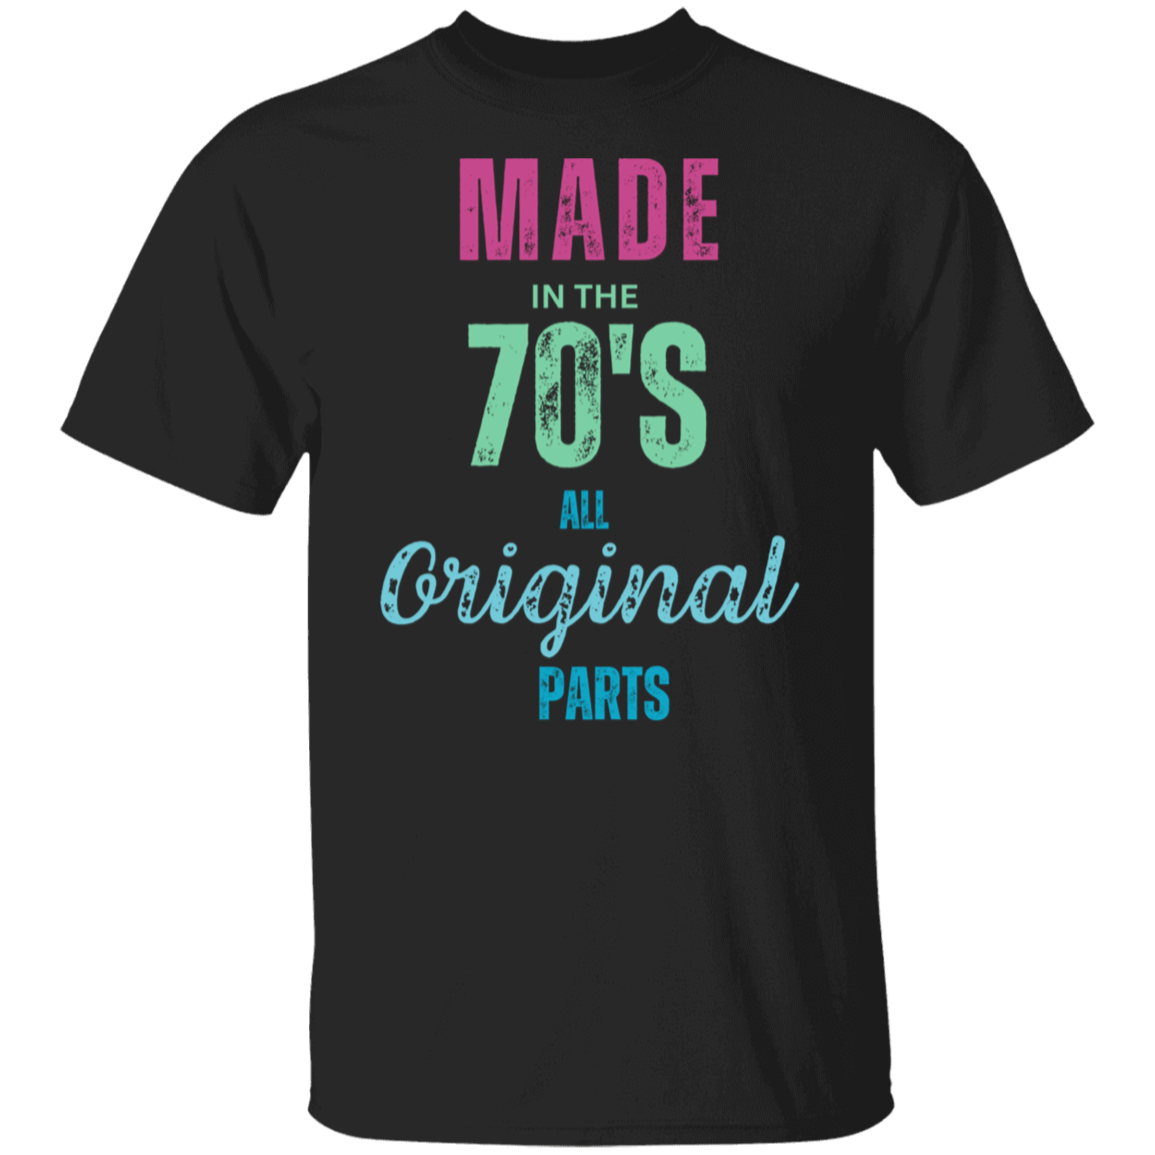 MADE IN THE 70'S  5.3 oz. T-Shirt